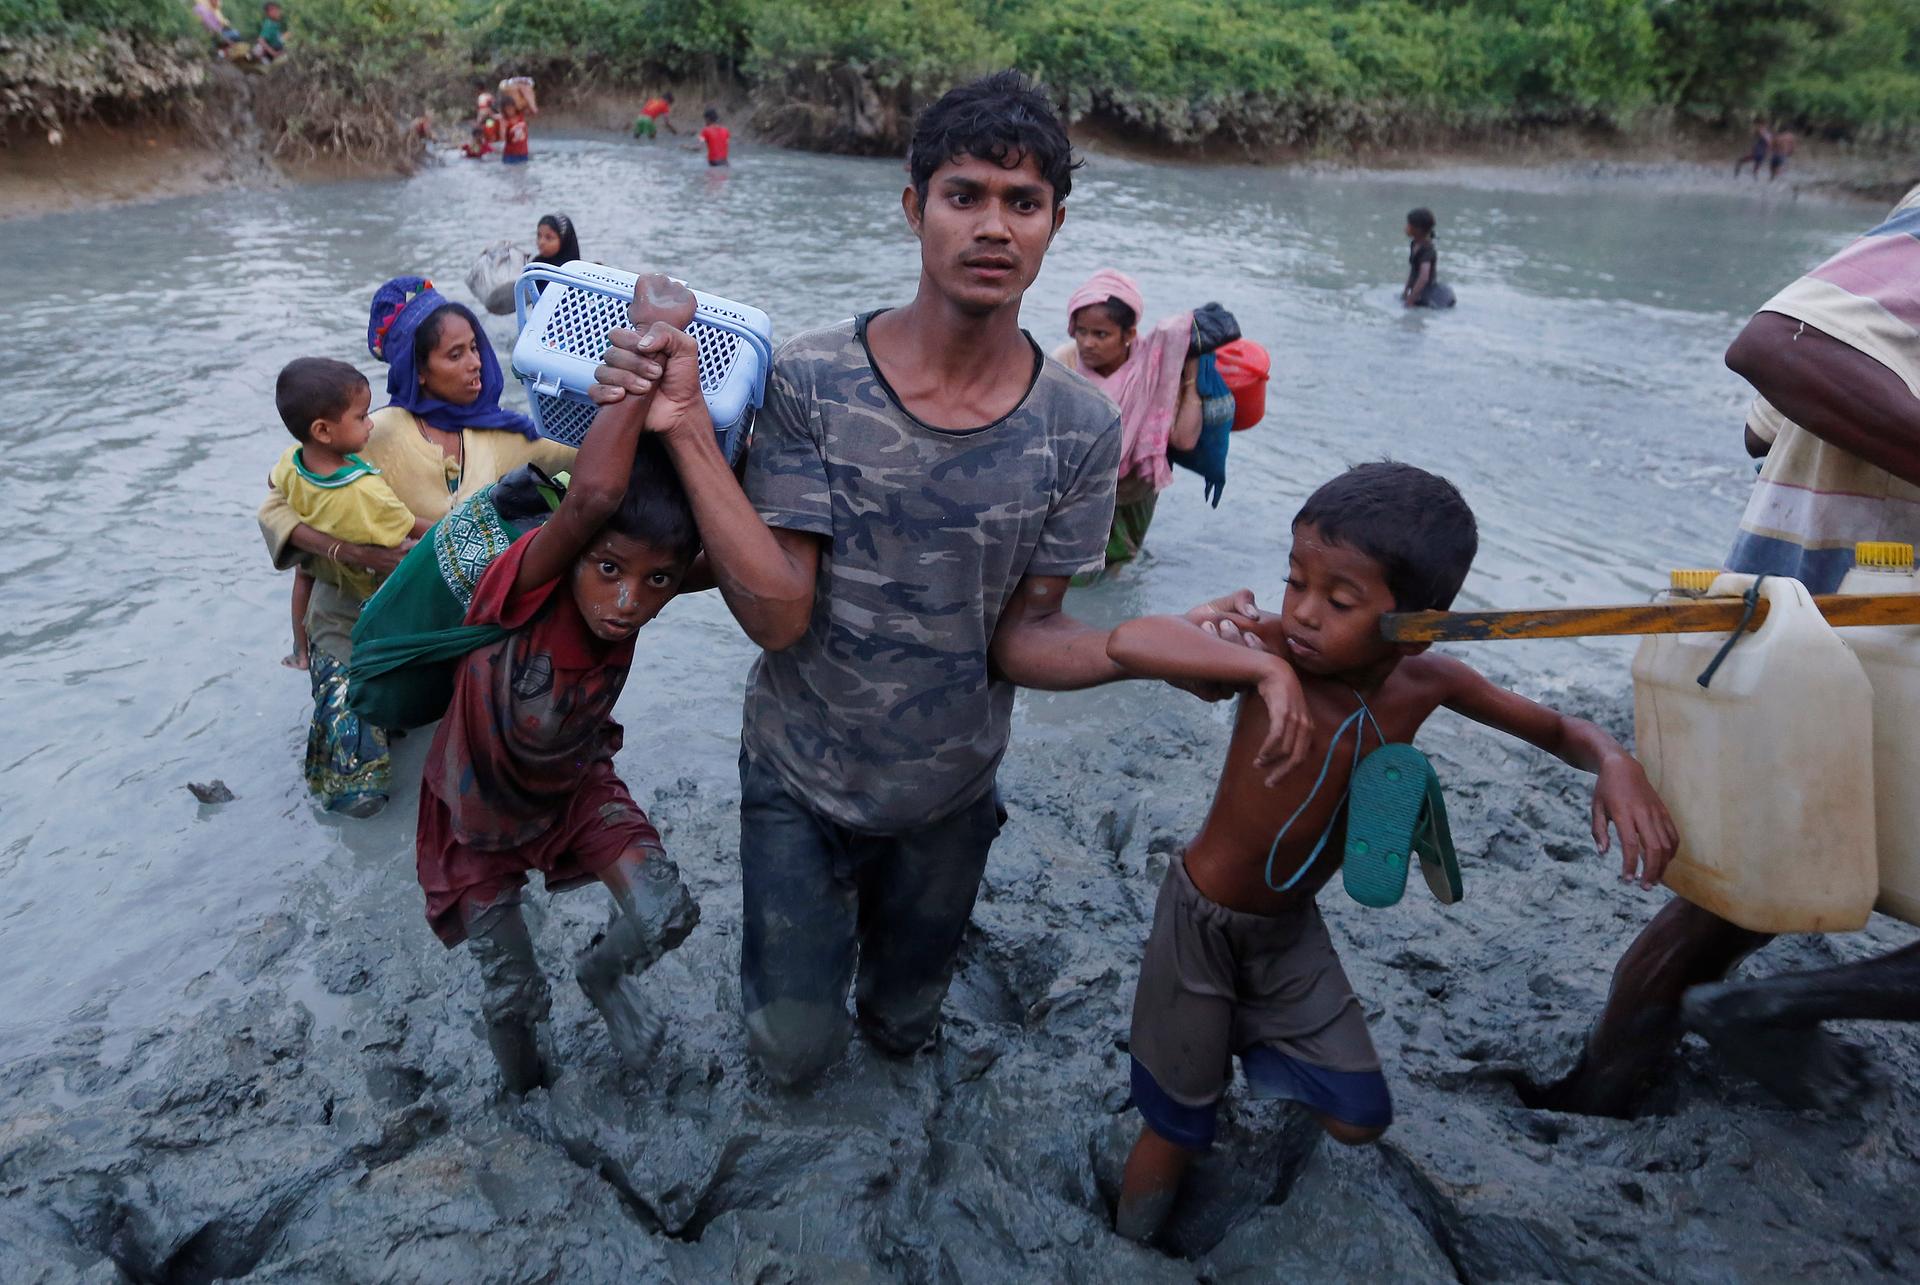 A Rohingya refugee helps children cross the mud after crossing the Naf River at the Bangladesh-Myanmar border. 